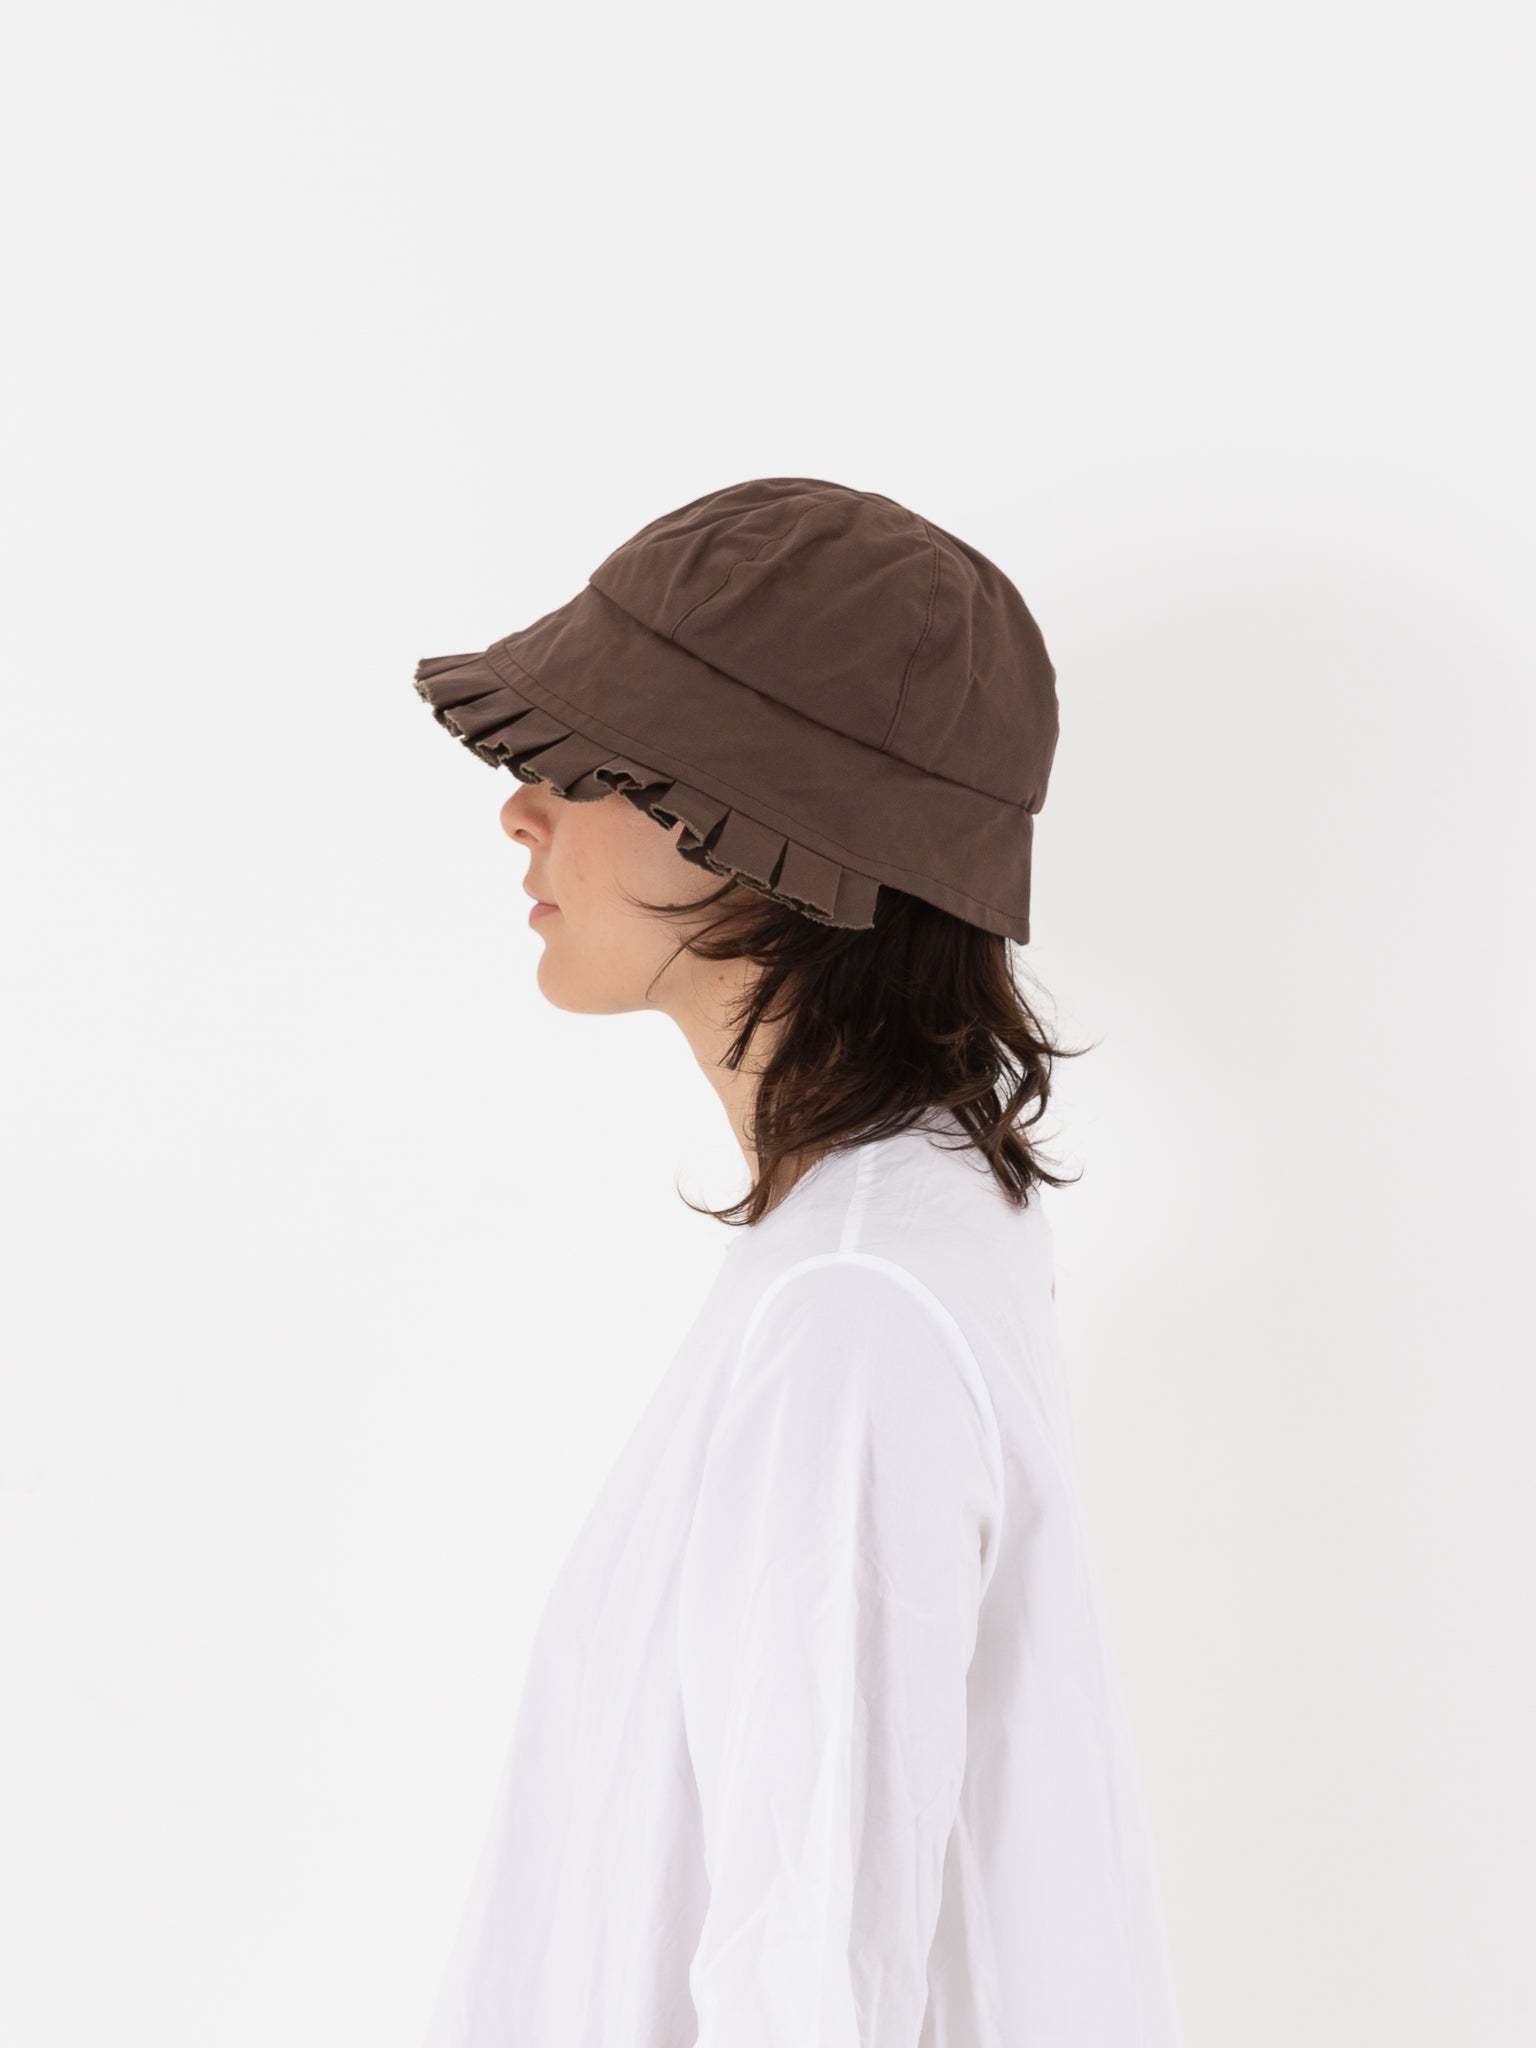 Studio Kettle Deck Hat with Frill, Cocoa - Worthwhile, Inc.